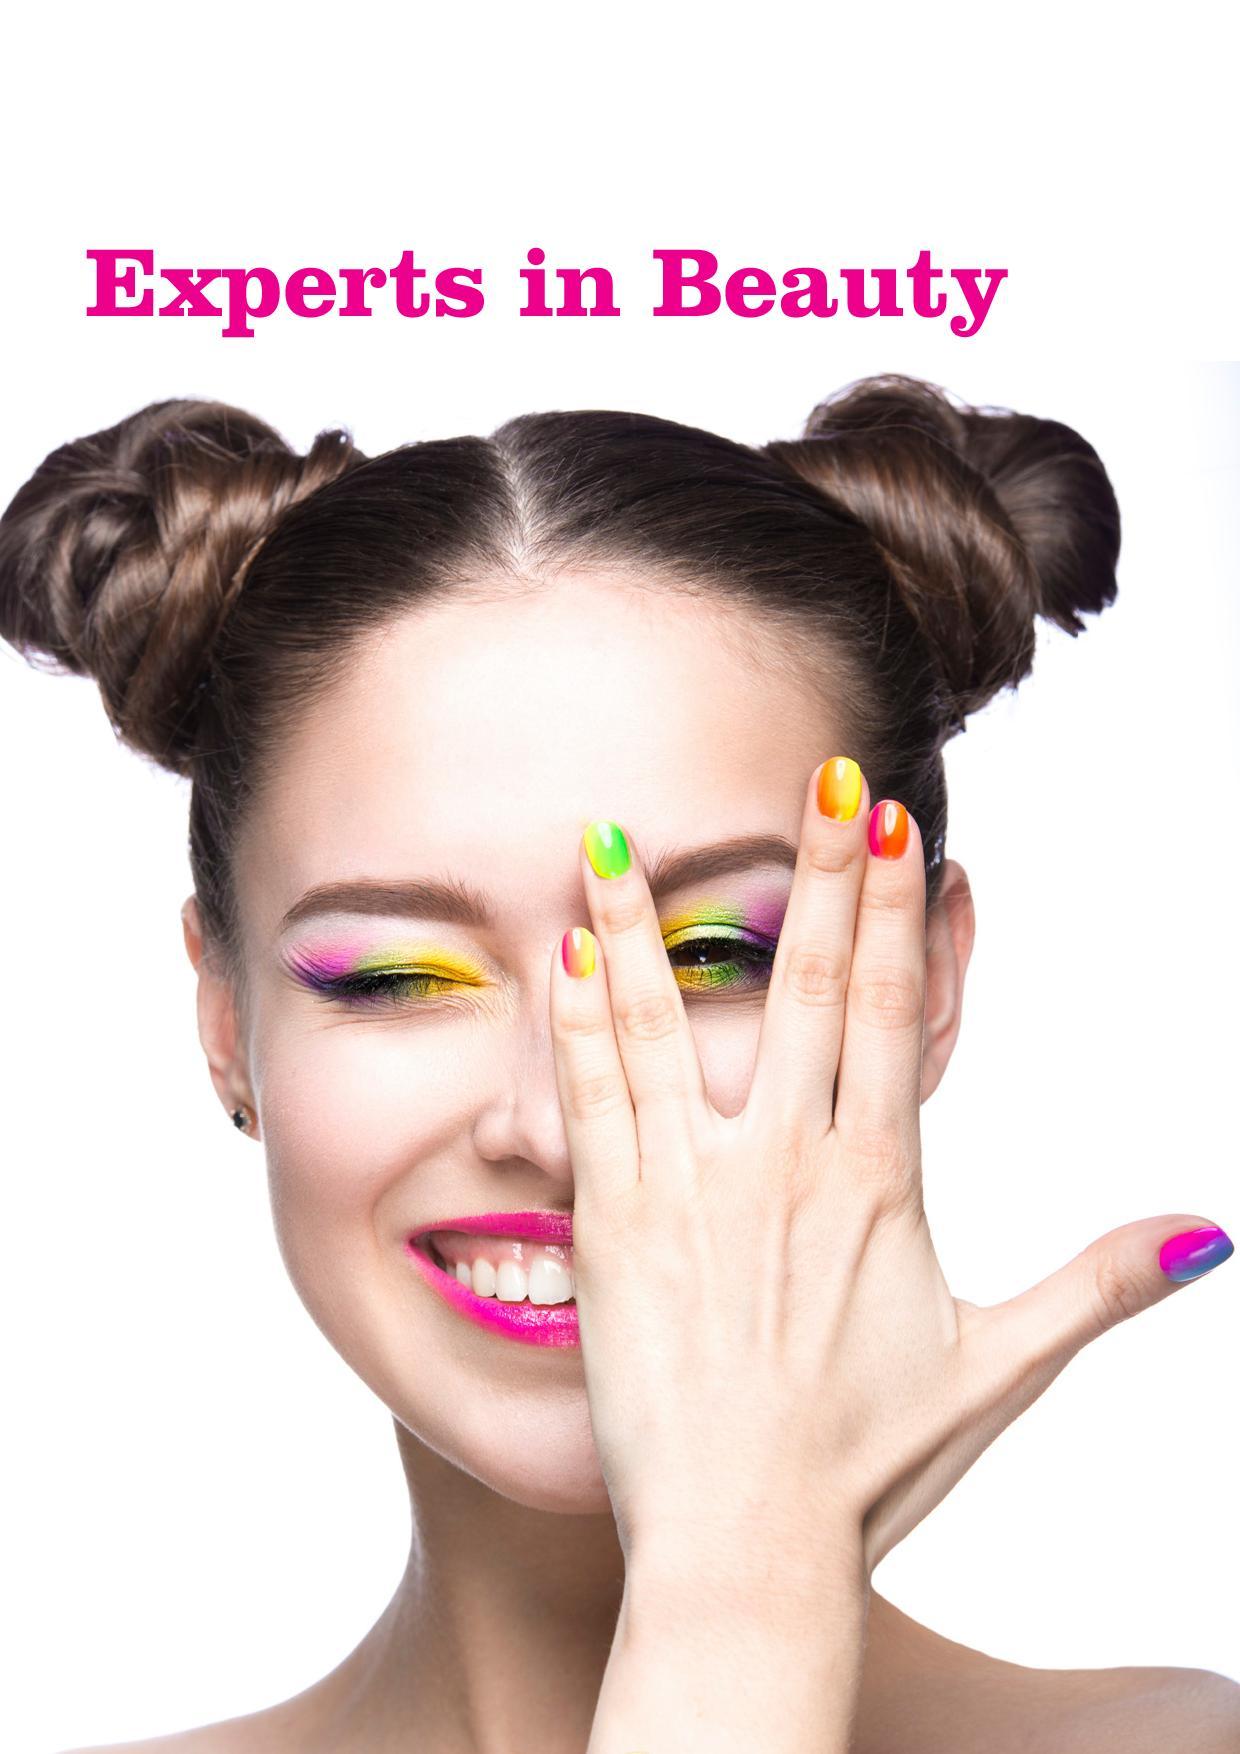 Experts in Beauty